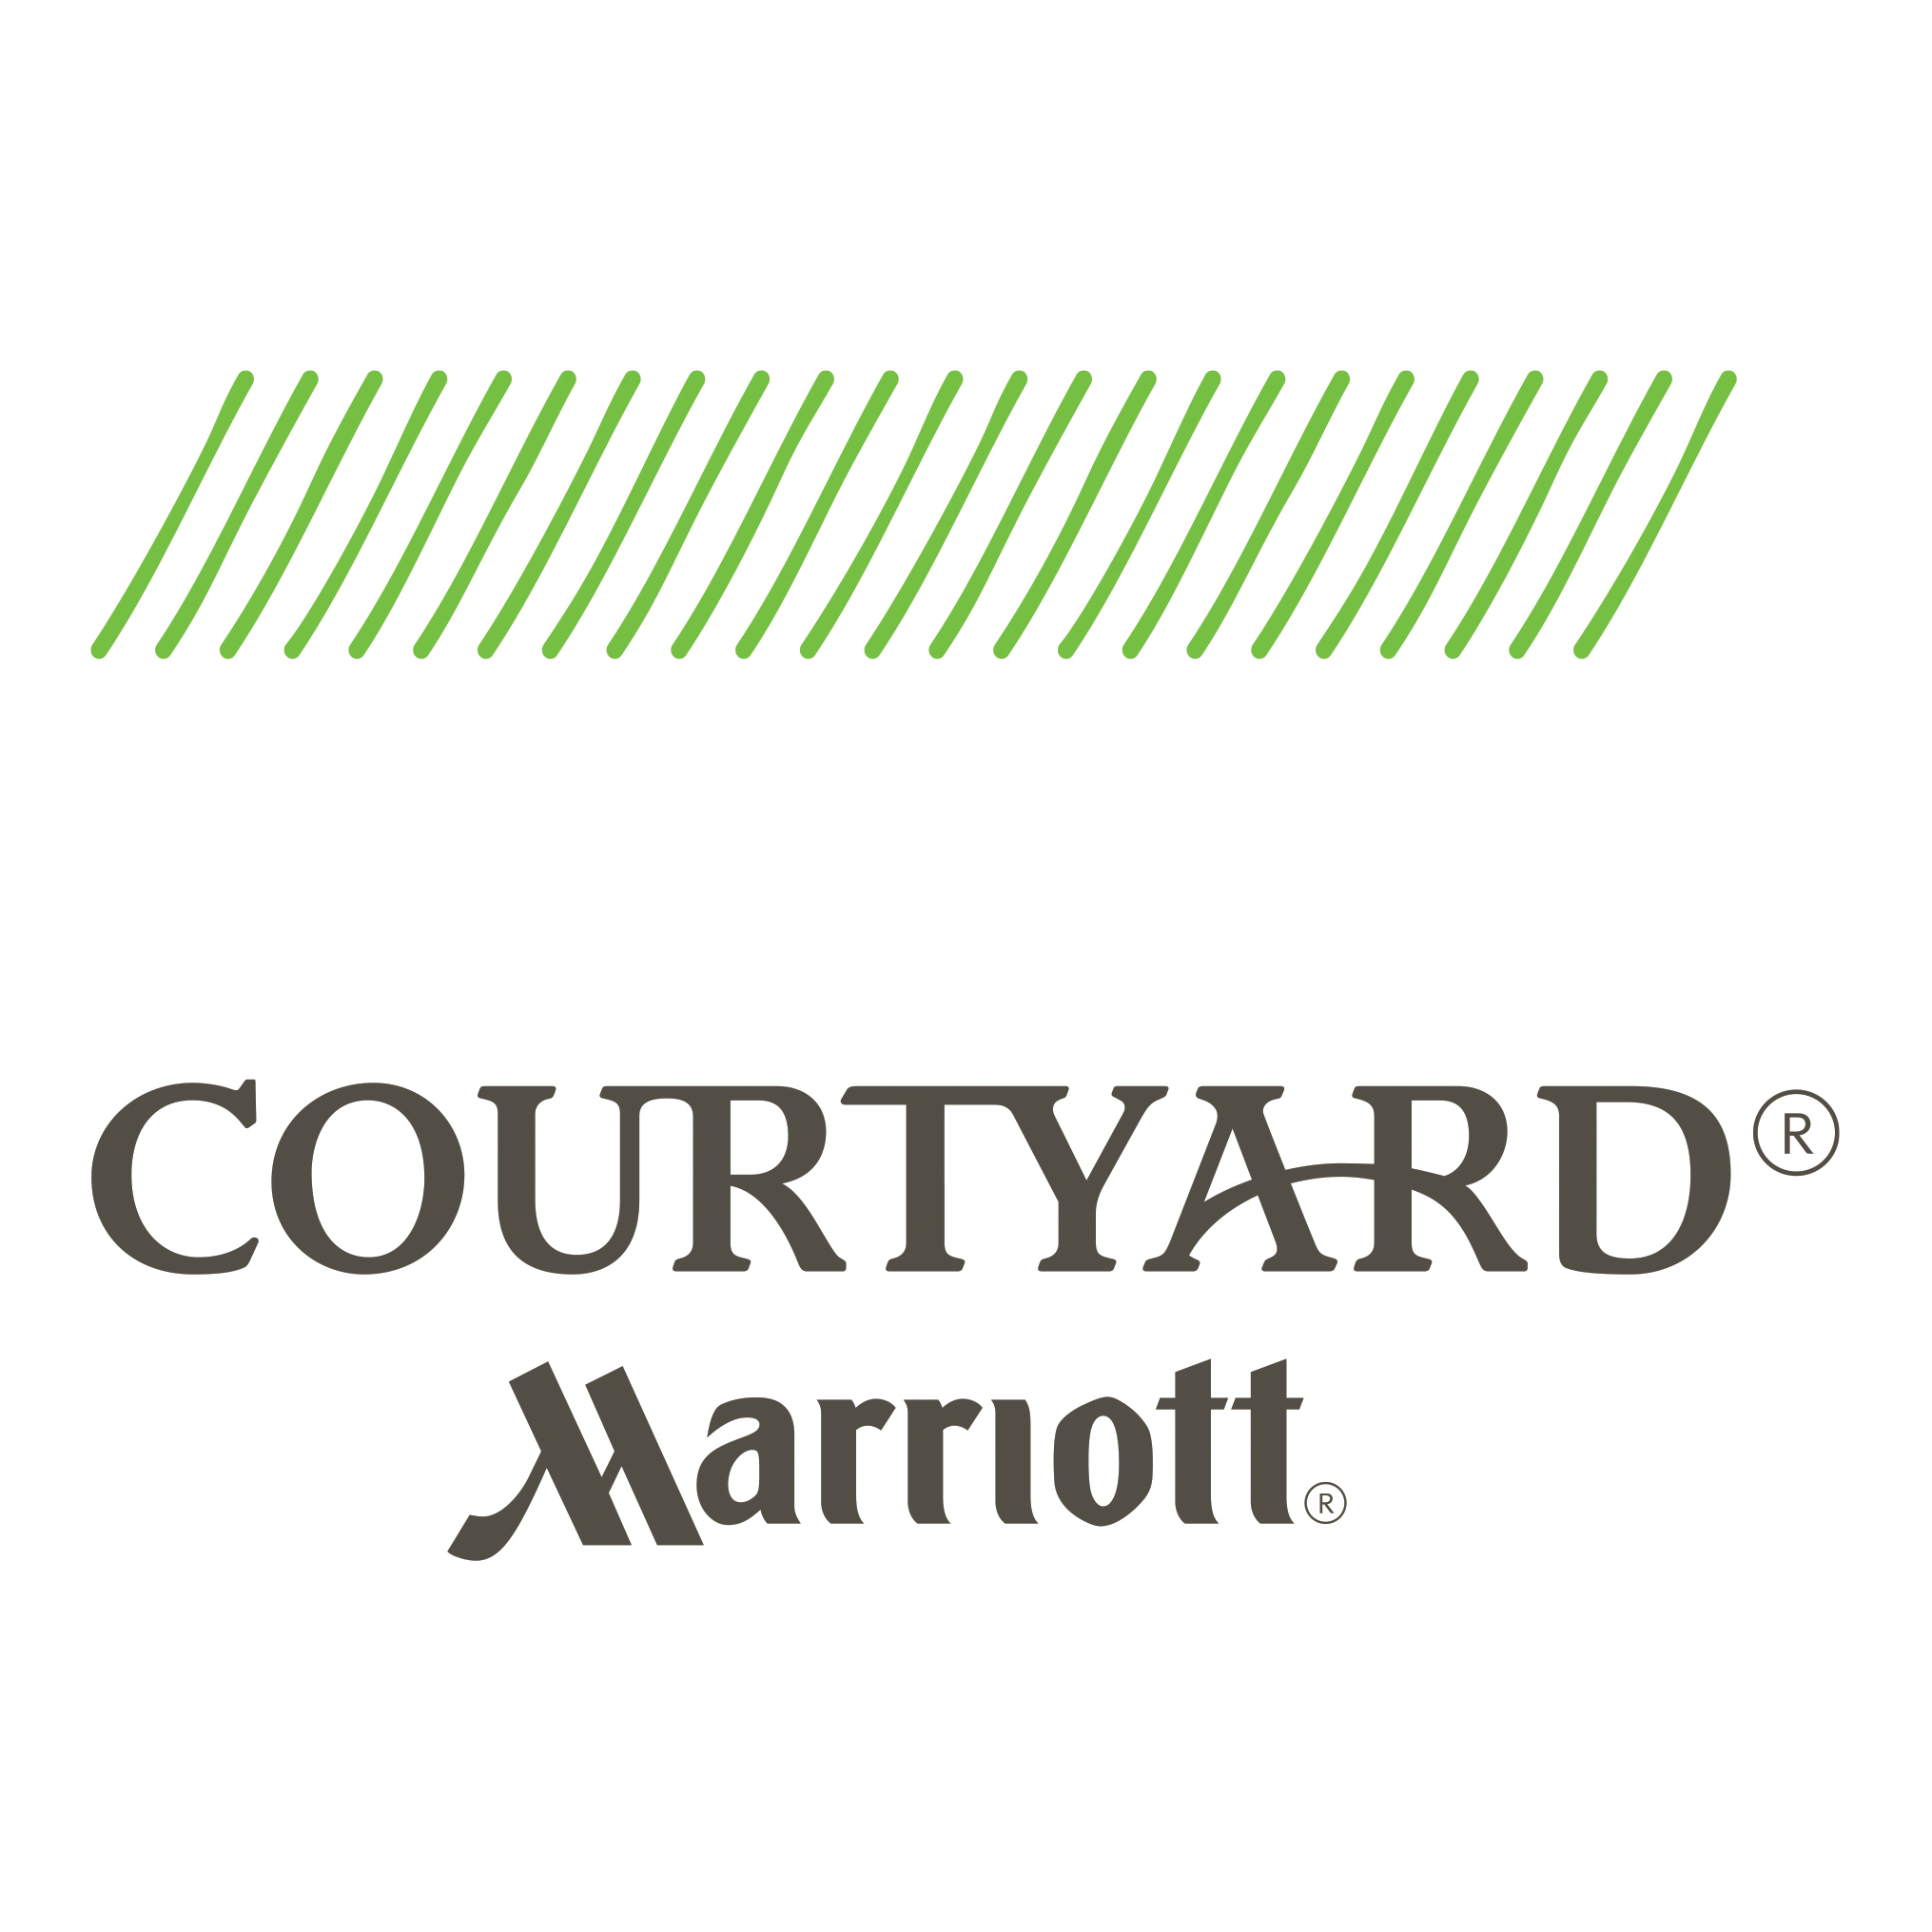 Courtyard by Marriott New Orleans Downtown/Convention Center Logo